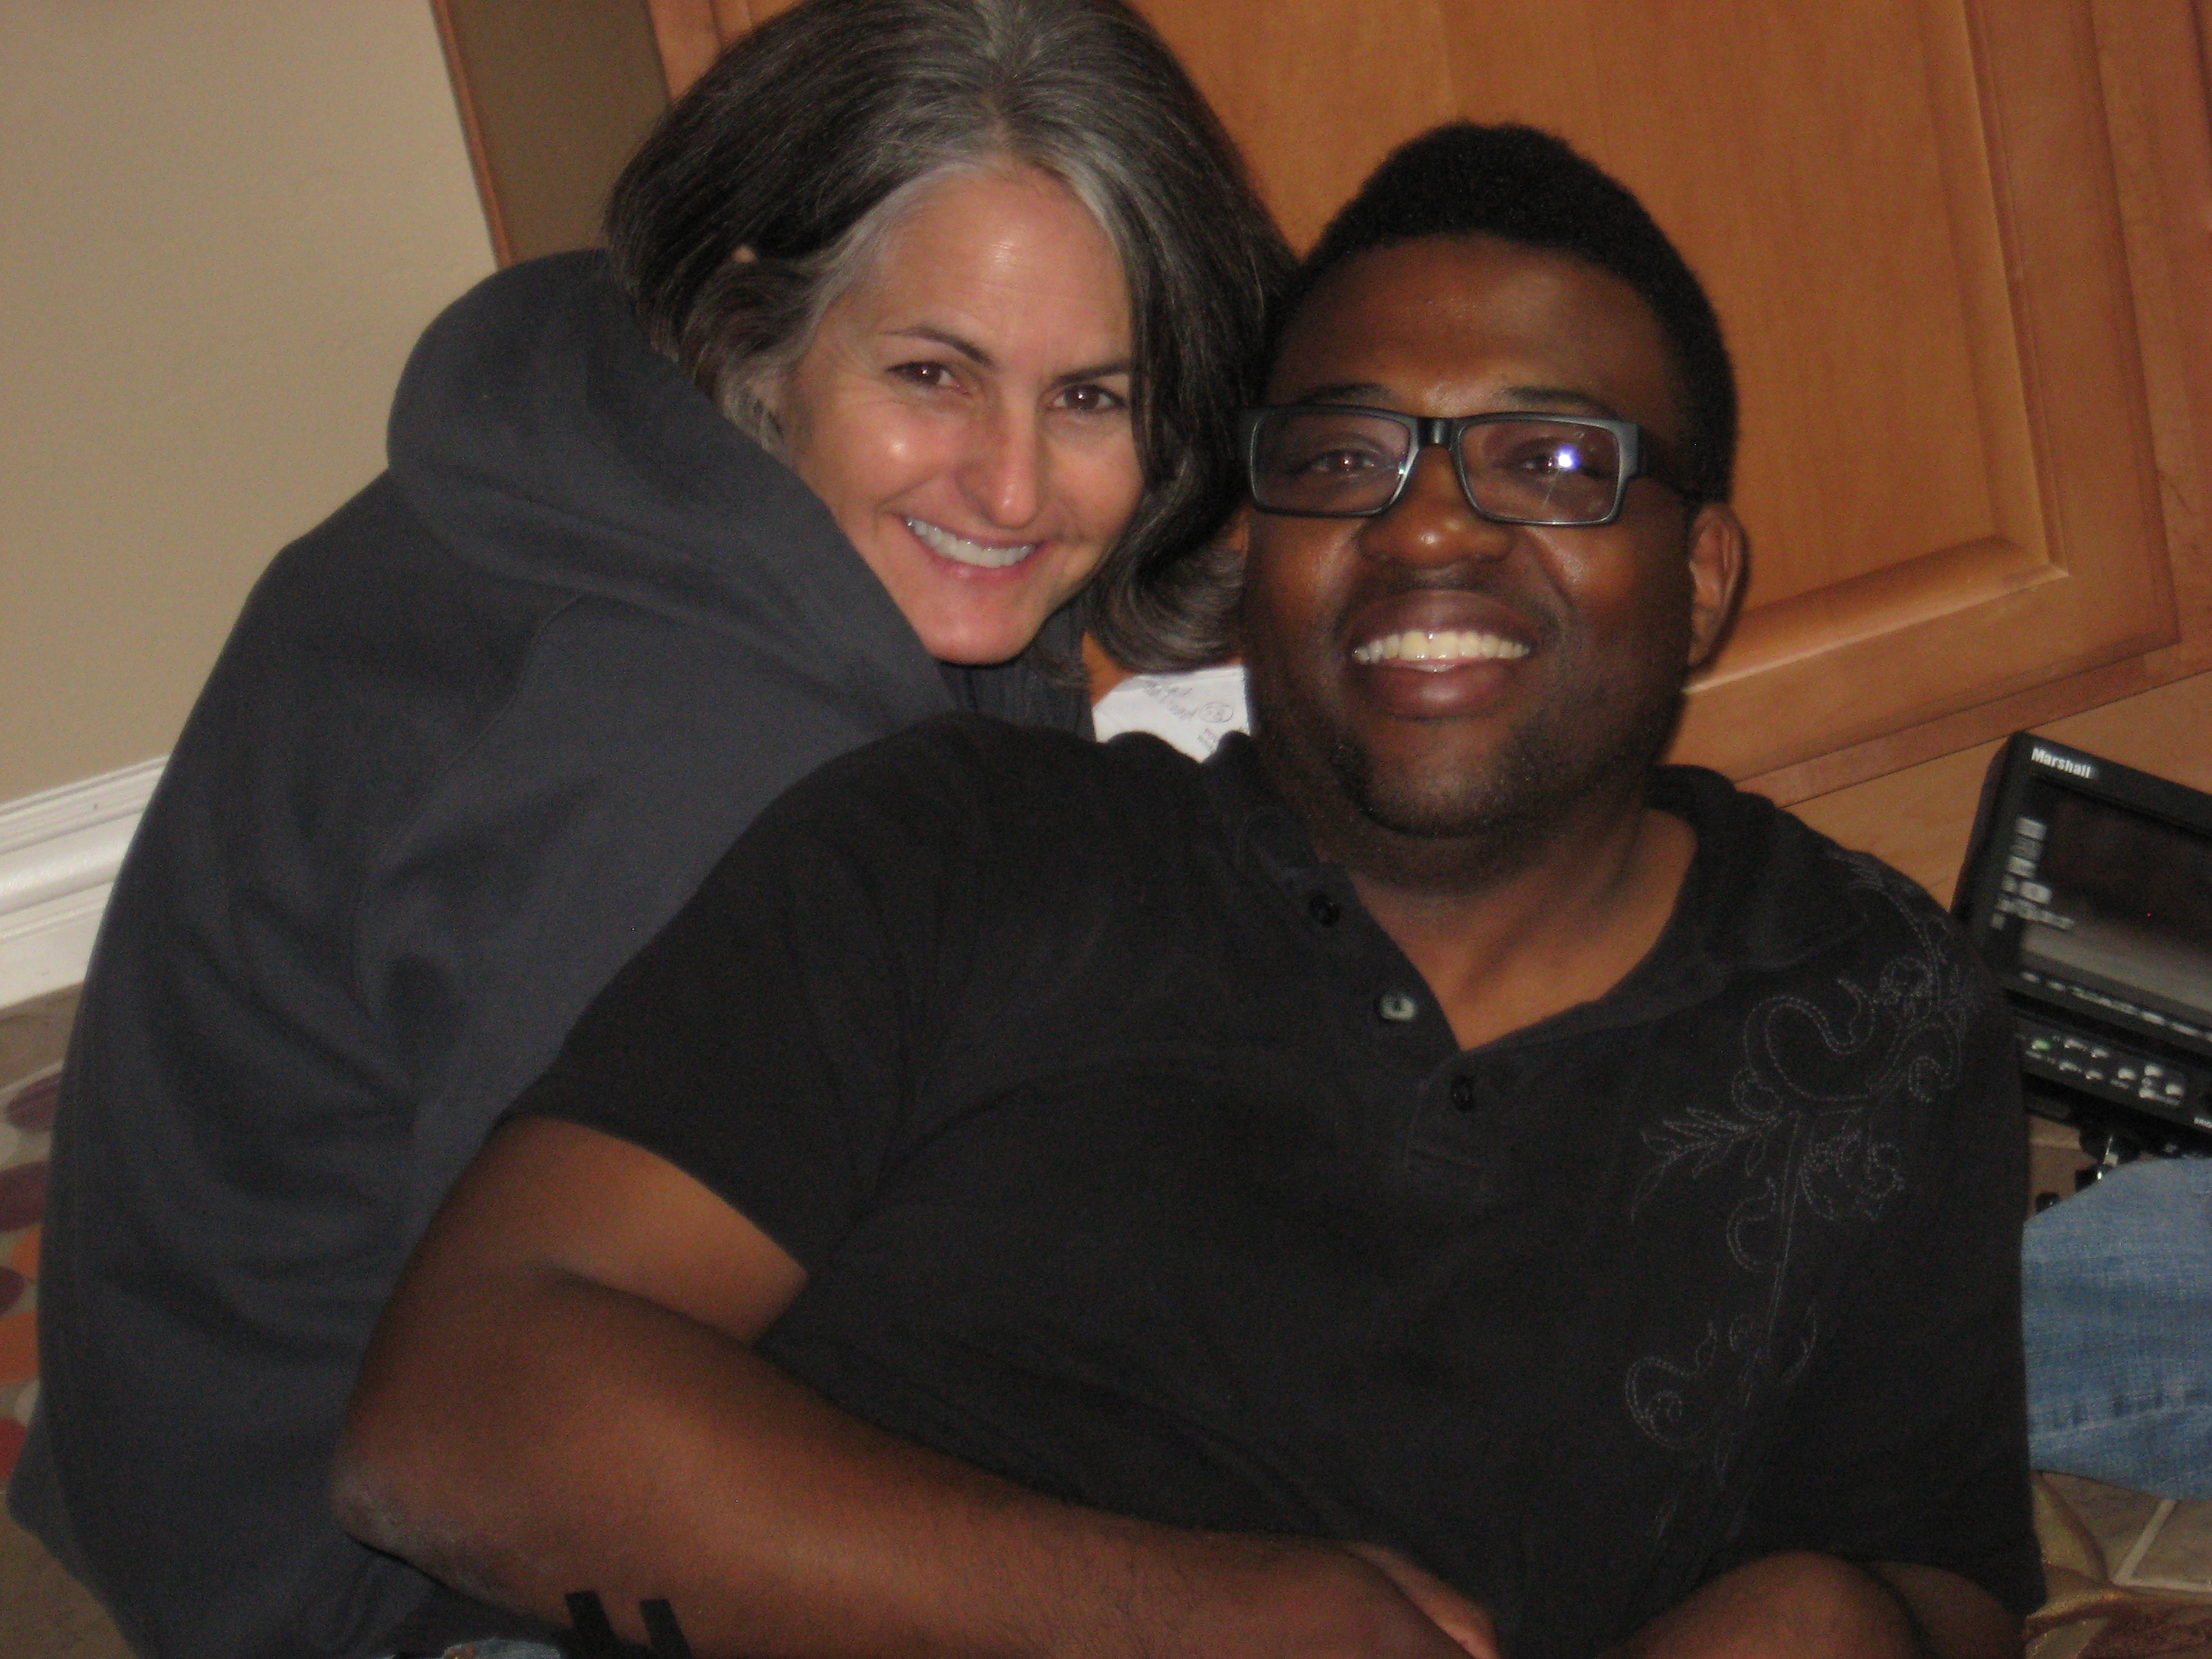 Diane M. Dresback (writer, director) with Director of Photography, Earnest Robinson on set for BLACK CLOUD.